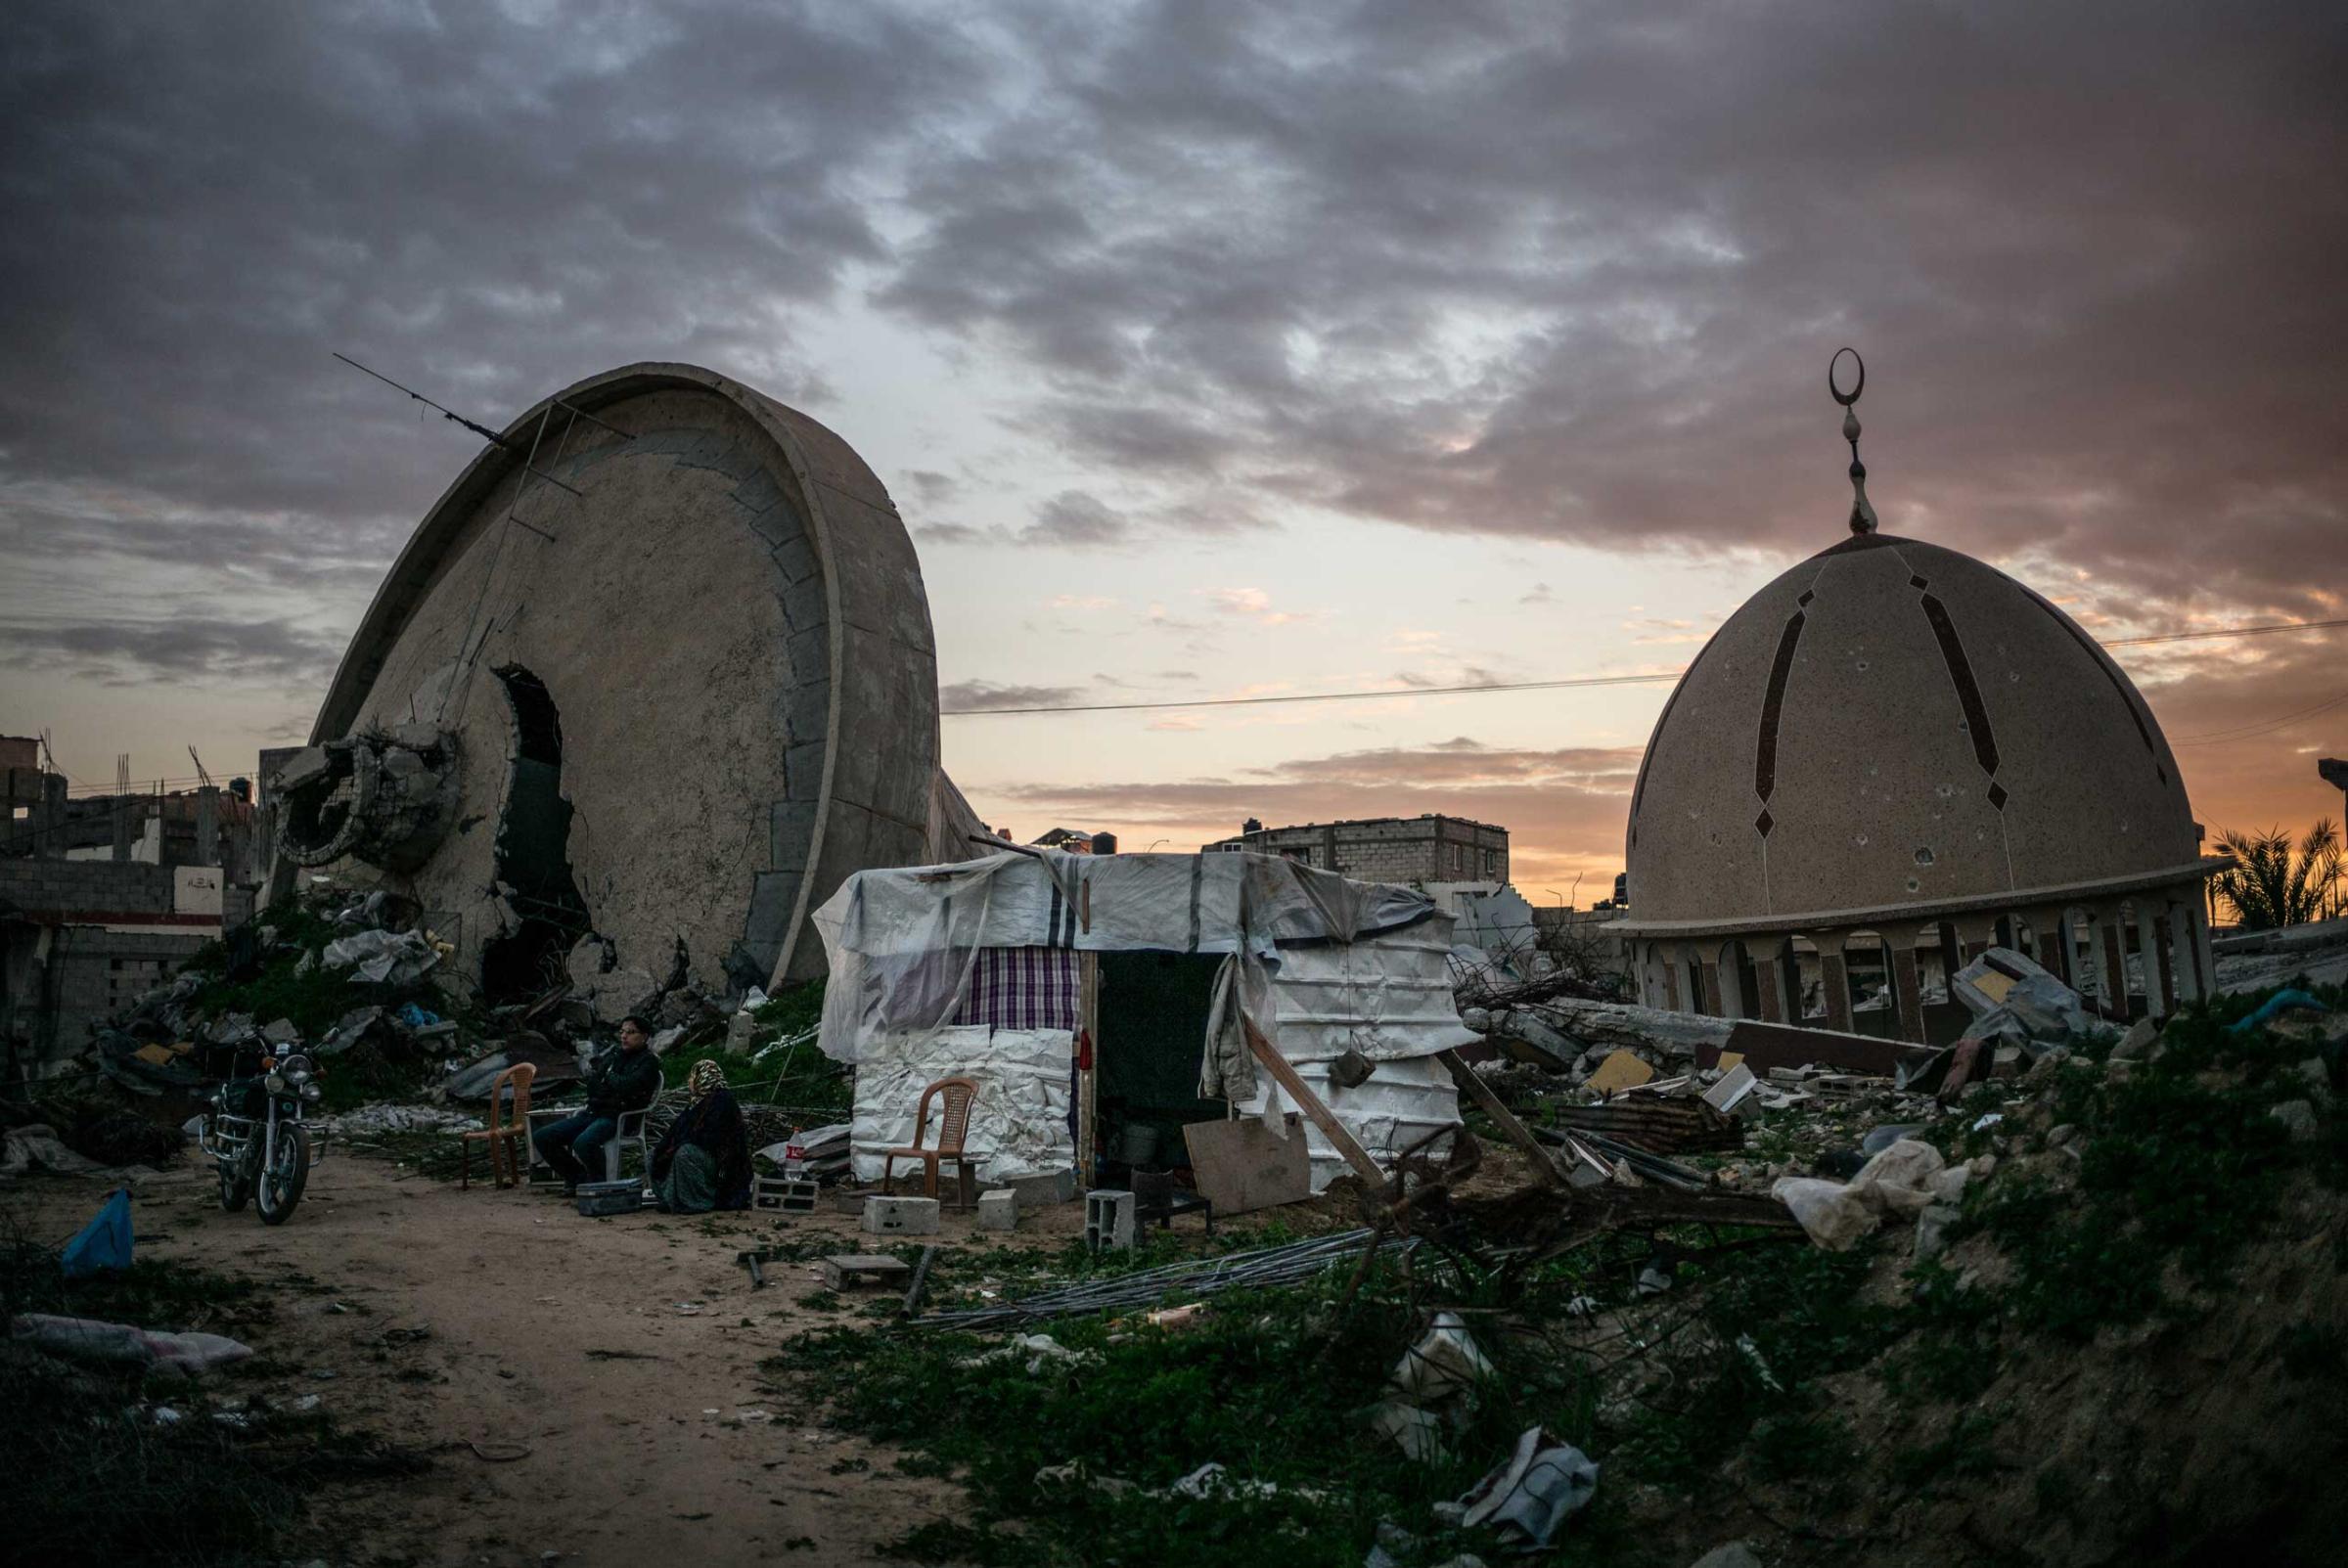 Khuza'a center, in the in the south of the Gaza Strip, has been heavily damaged during the last assault, known as Operation Protective Edge. Gaza Strip, December 2014.